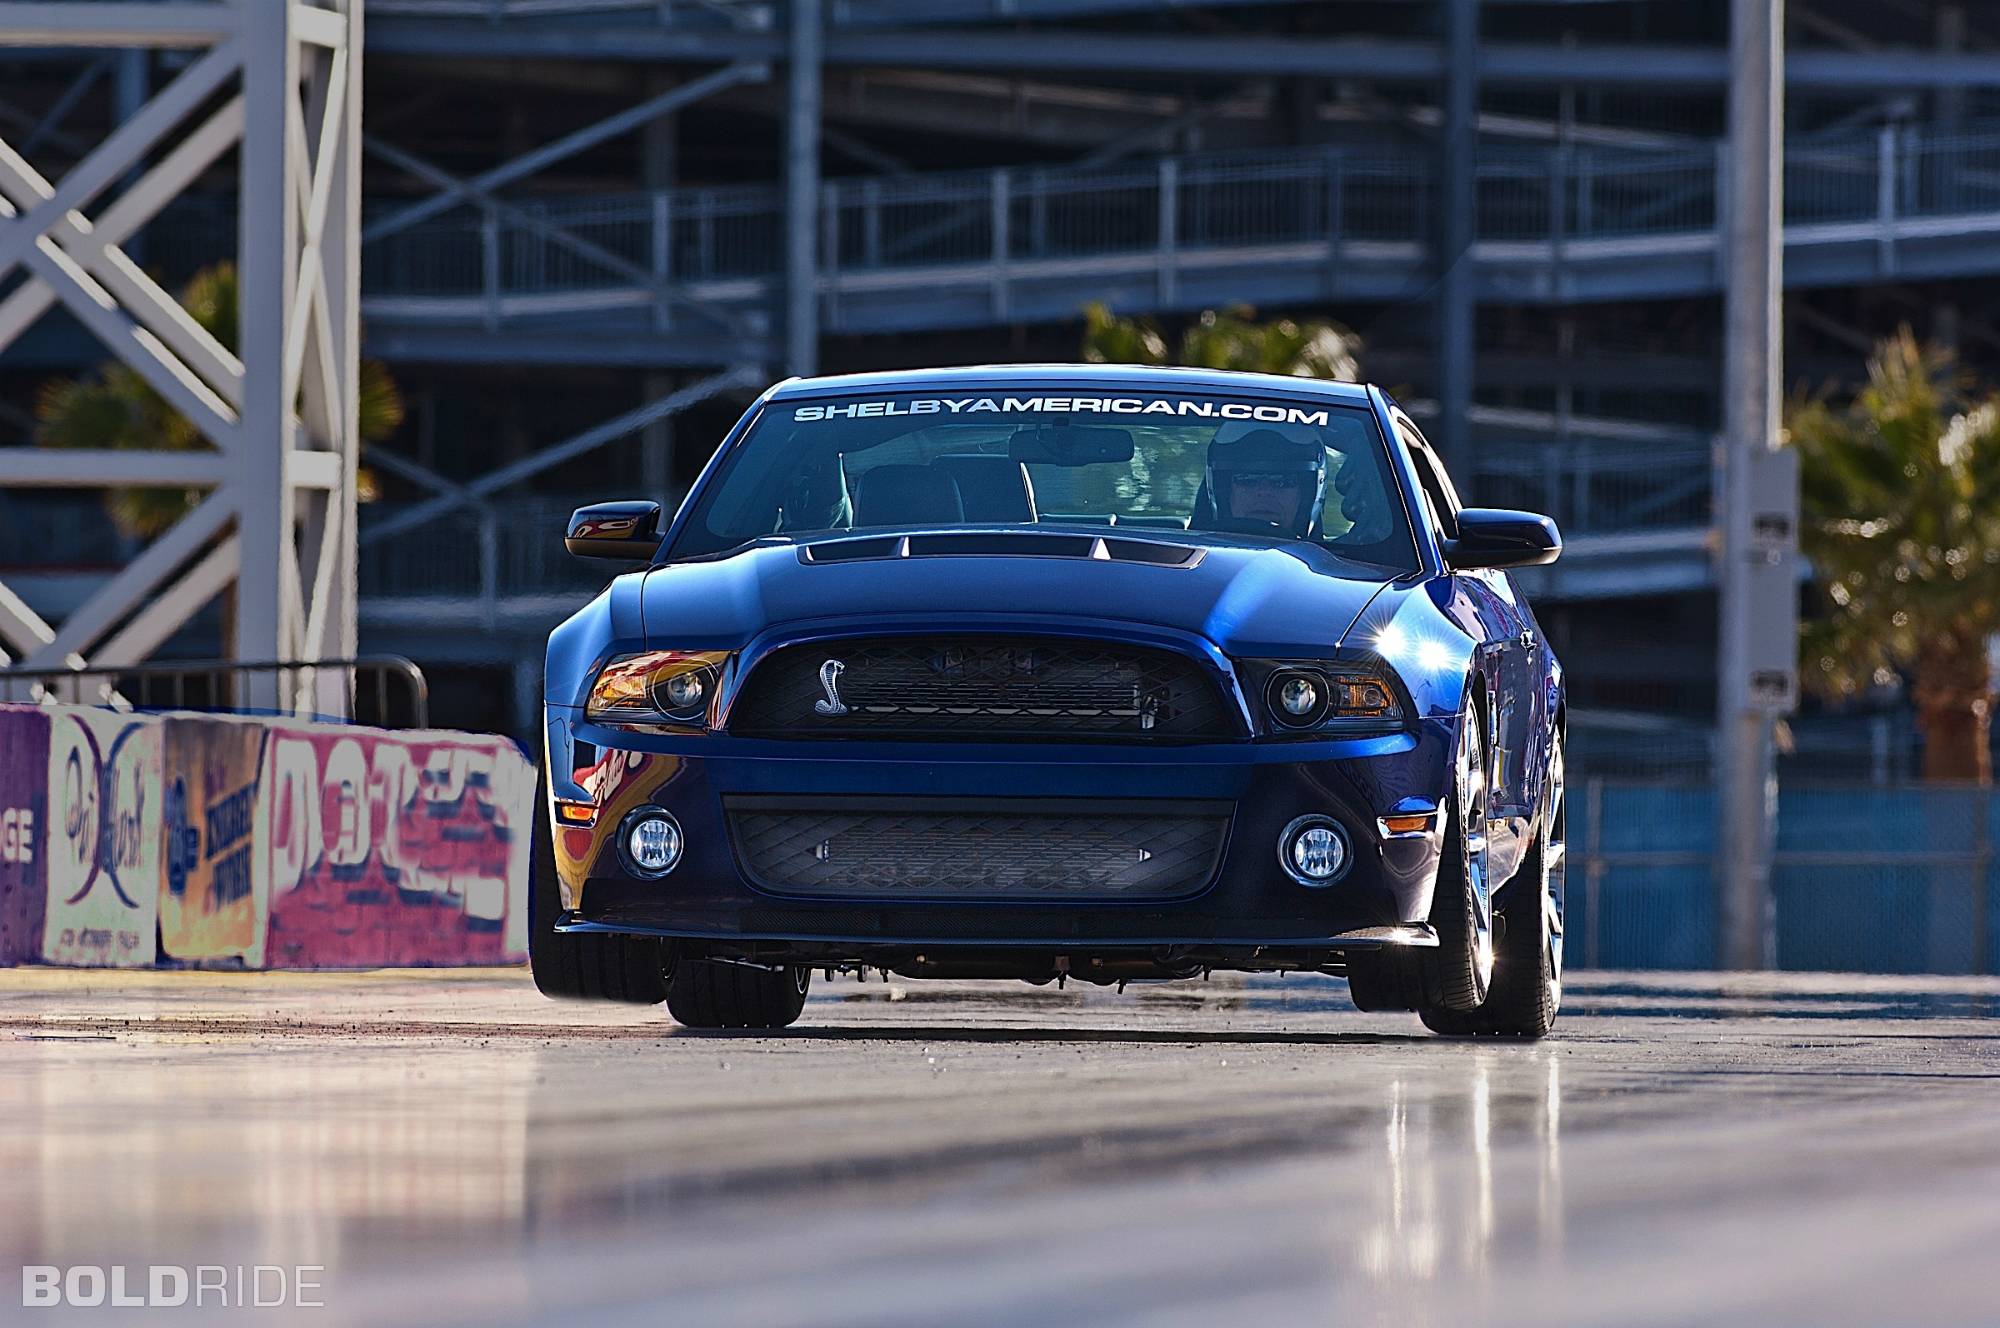 Ford Mustang Shelby 1000 drag racing race car hot rod muscle